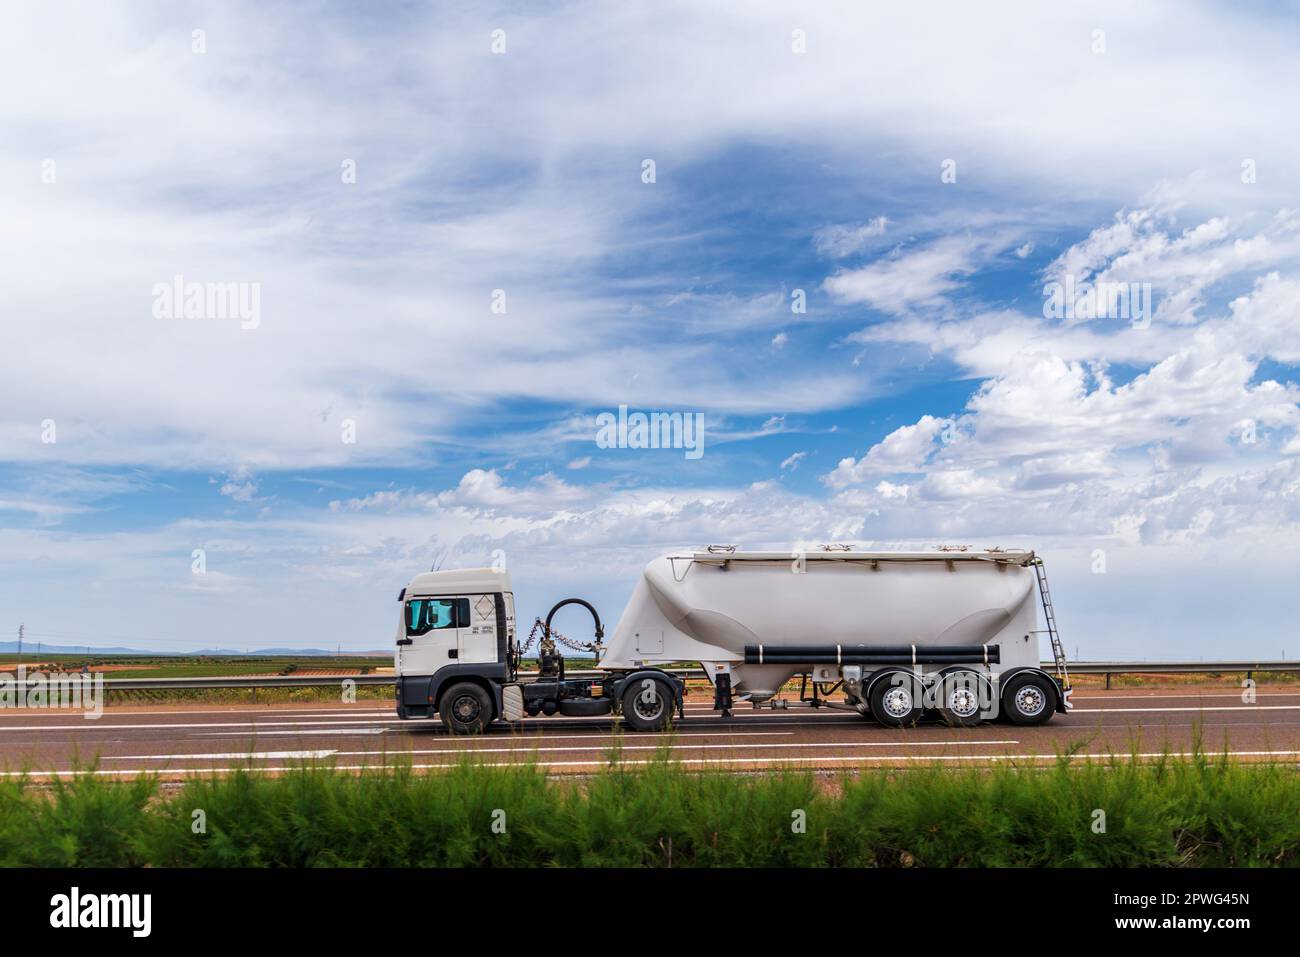 Tanker truck for the transport of bulk cement circulating on a highway. Stock Photo